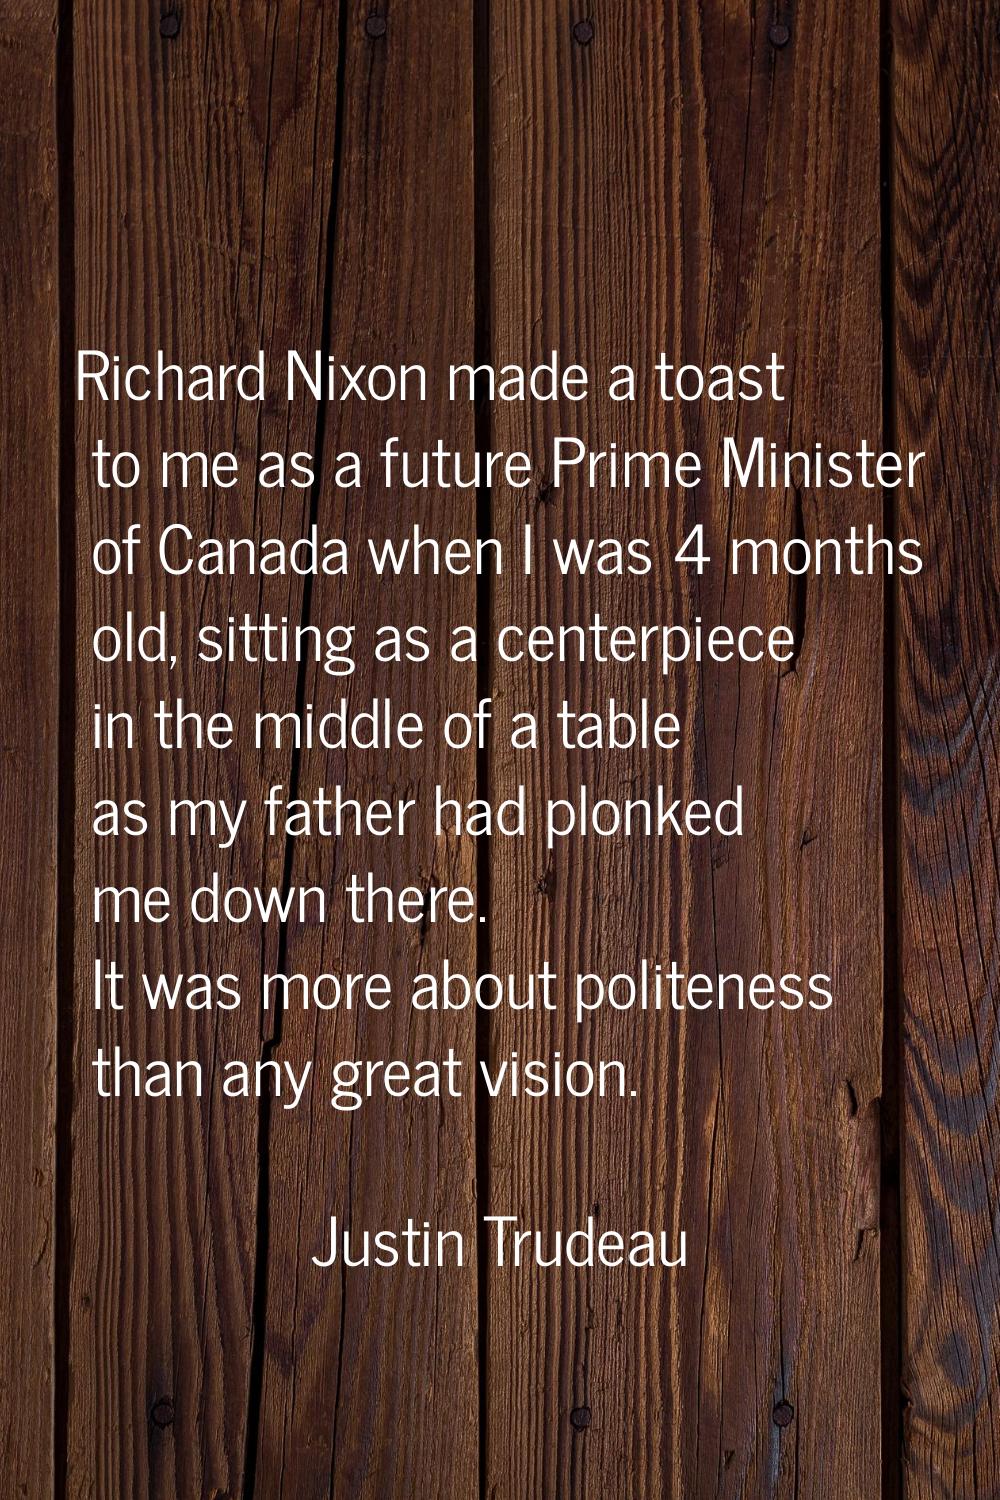 Richard Nixon made a toast to me as a future Prime Minister of Canada when I was 4 months old, sitt